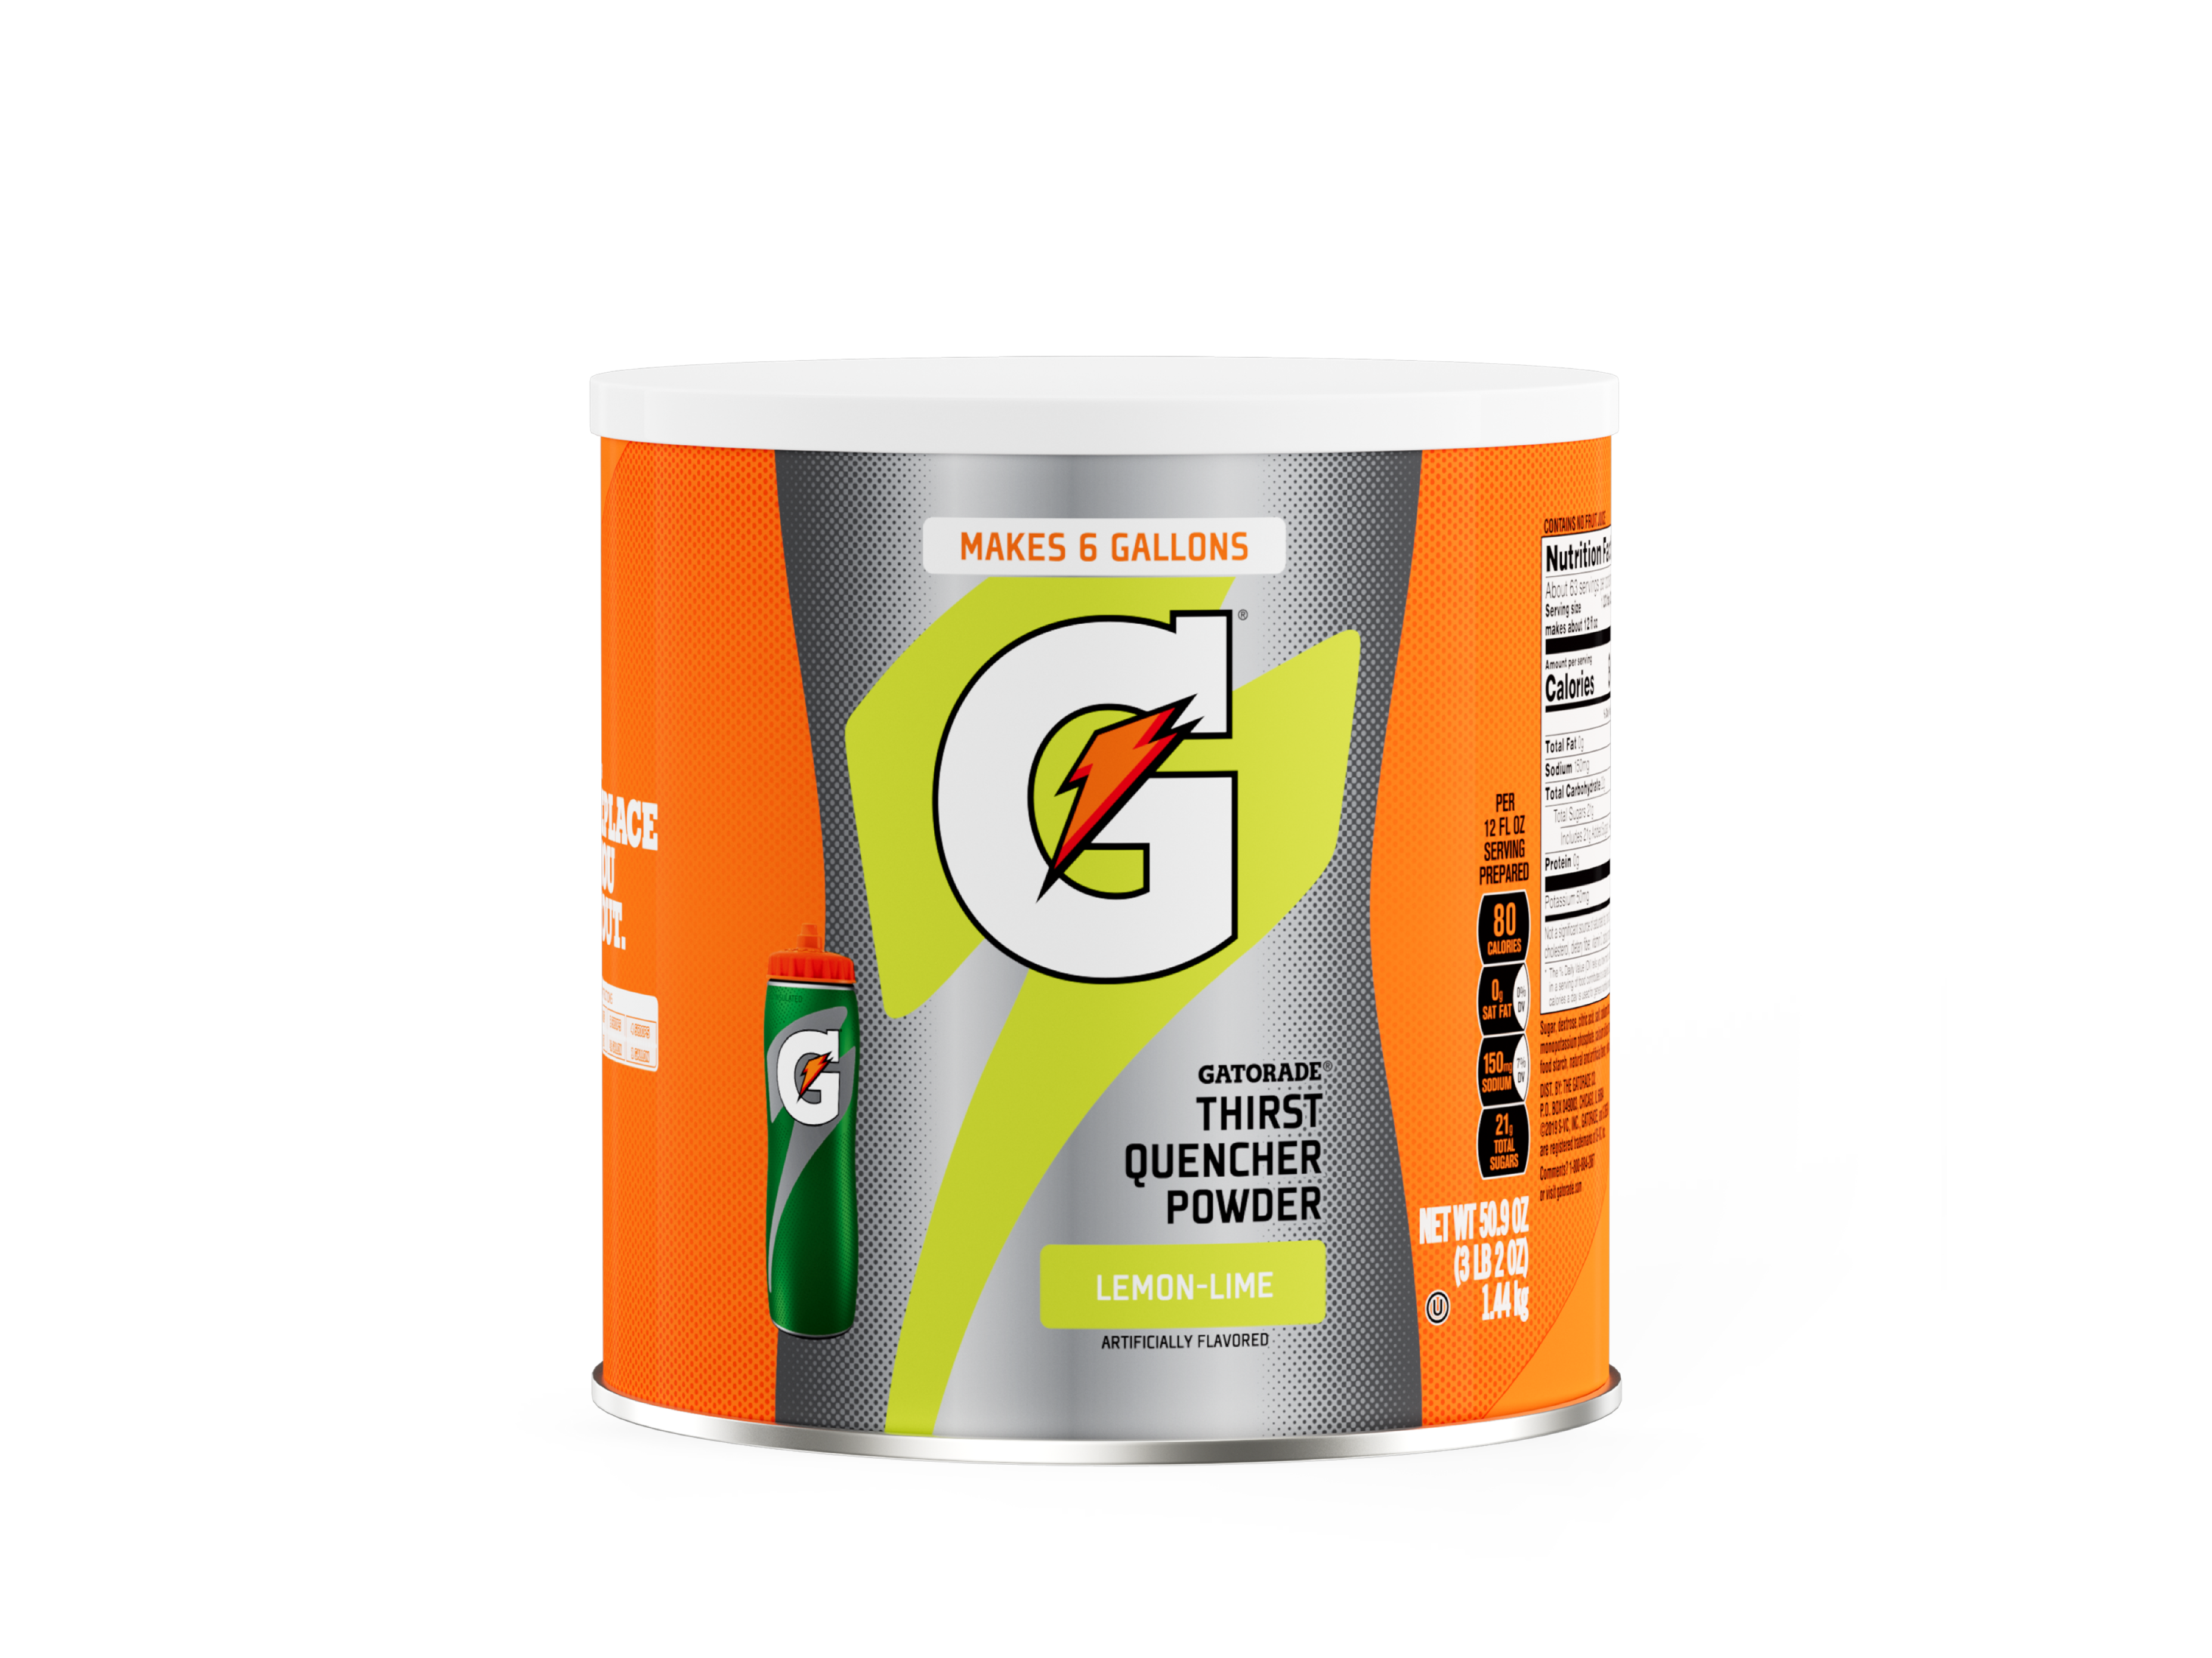 Gatorade thirst quencher 6 gallon lemon lime canister